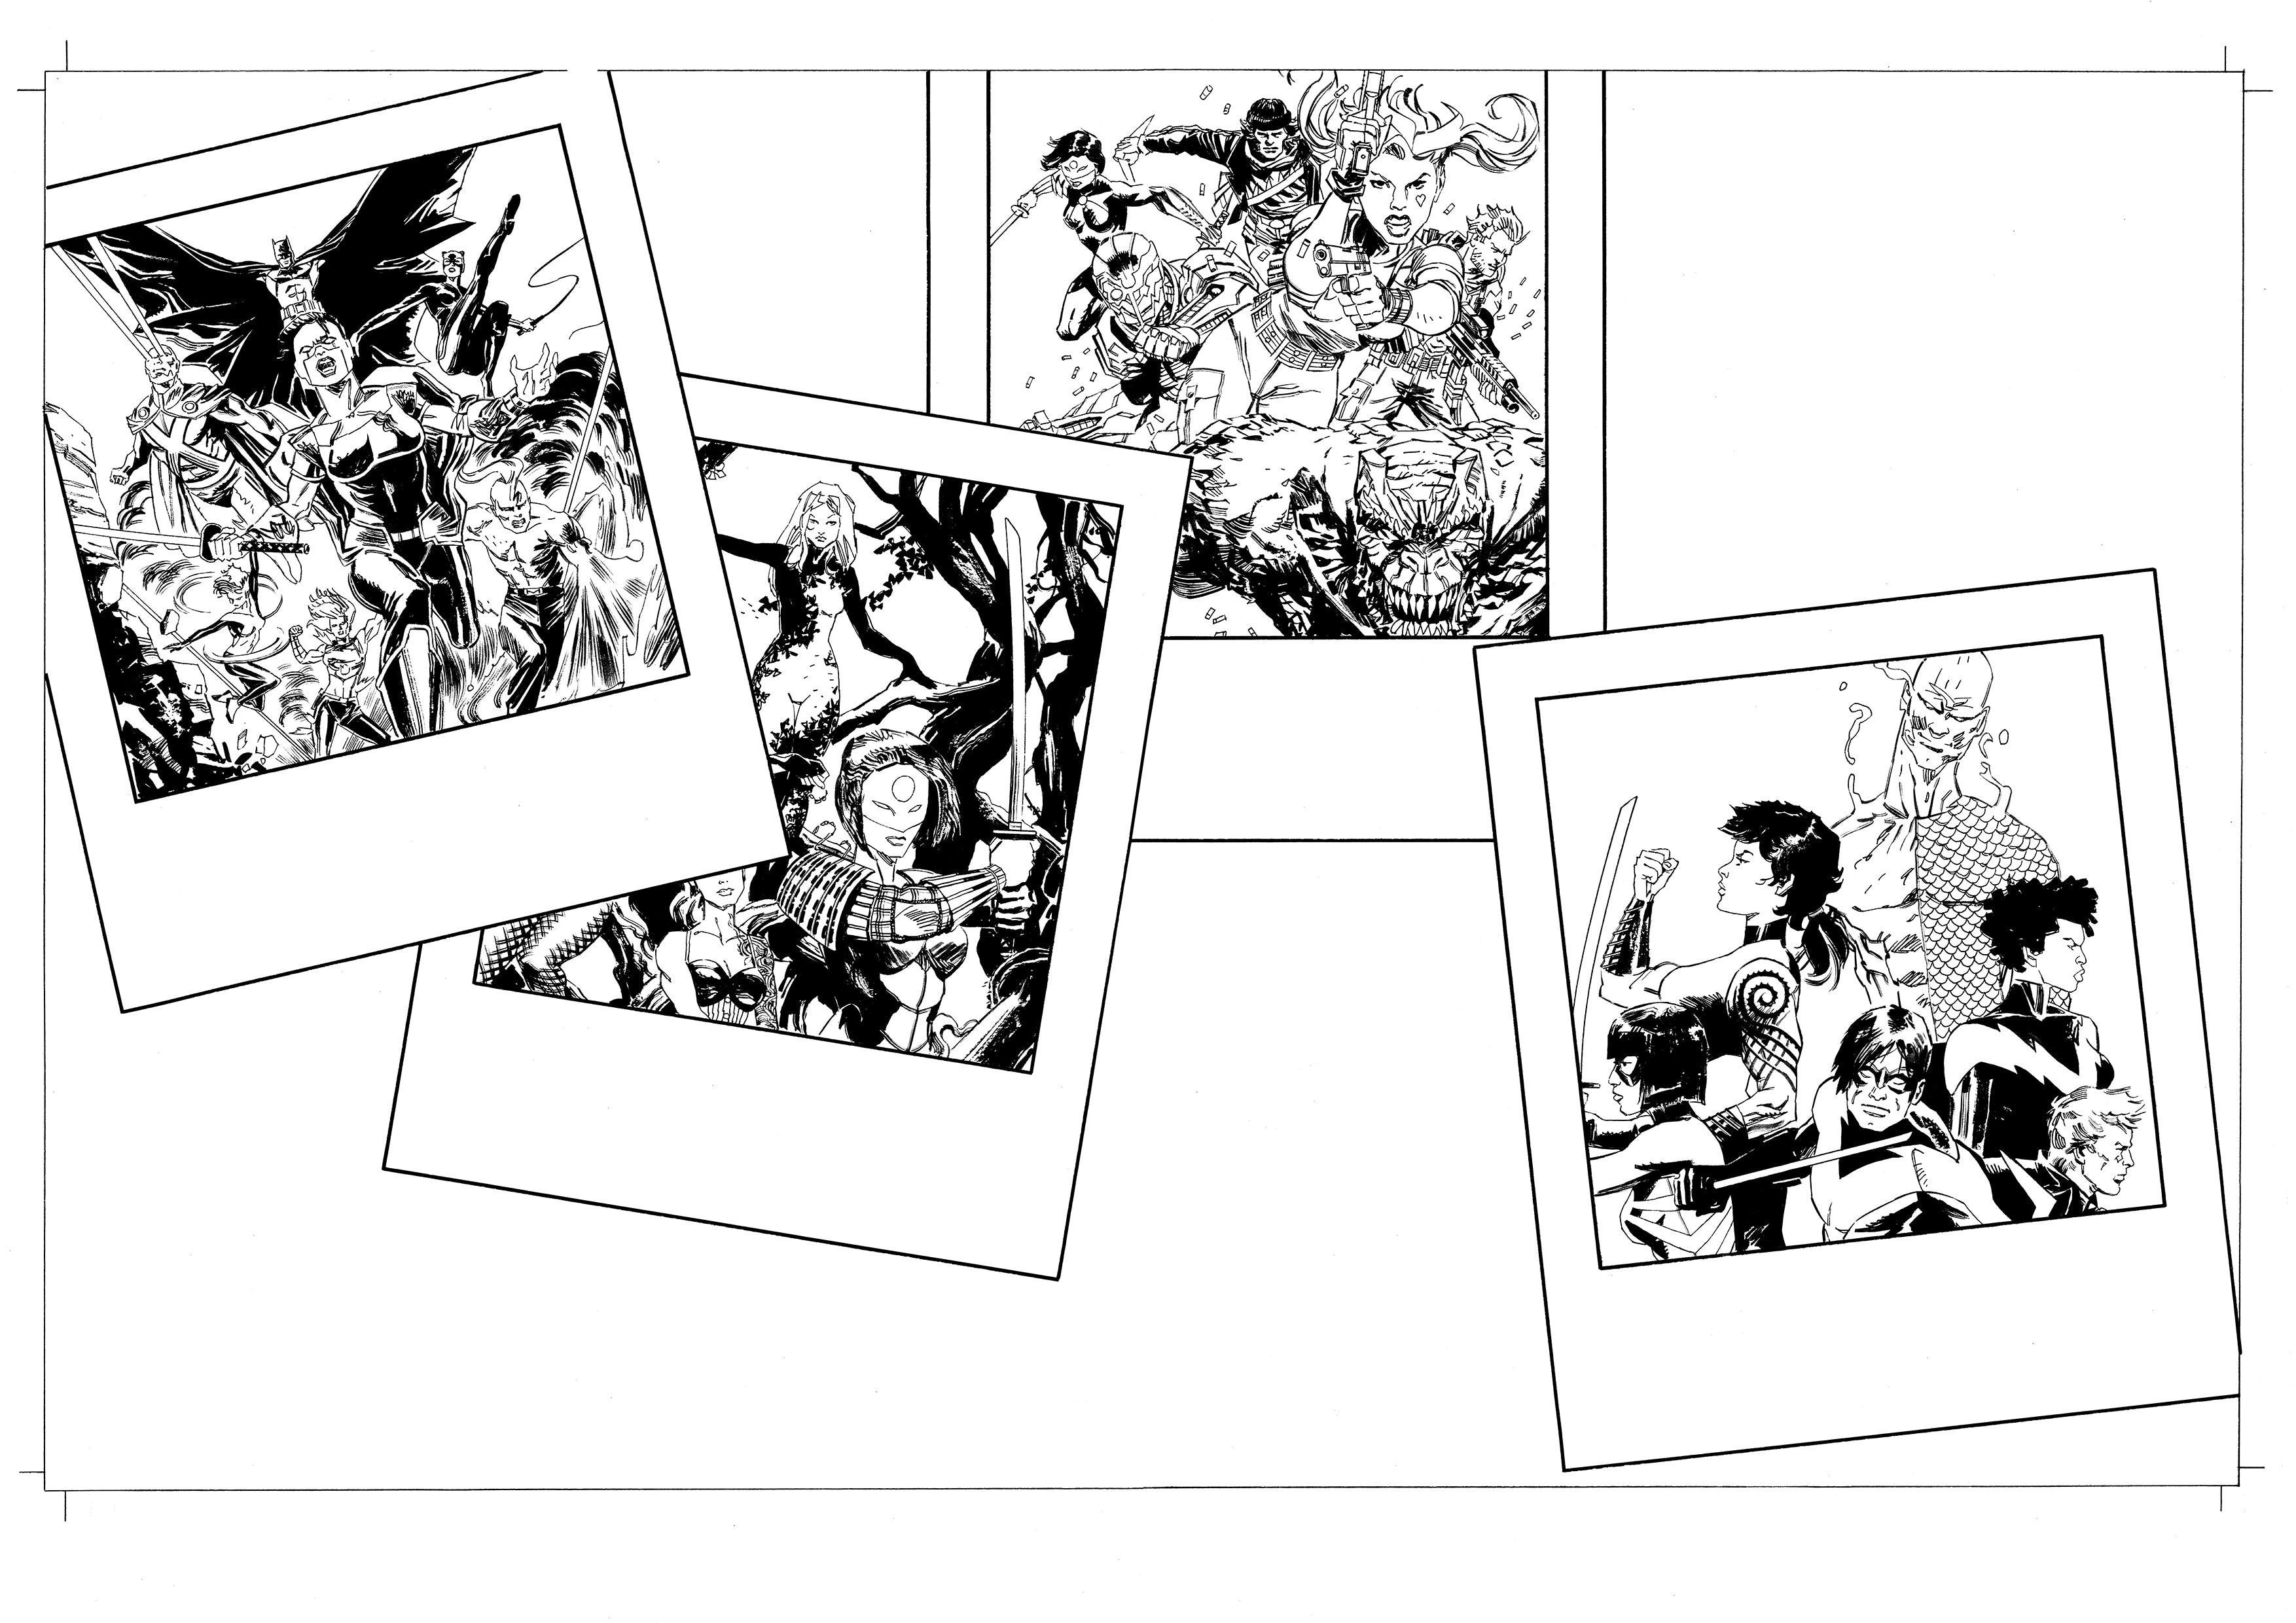 Andrea Cucchi Original Art Other History of DC #3 Page 44-45 Double Page Spread